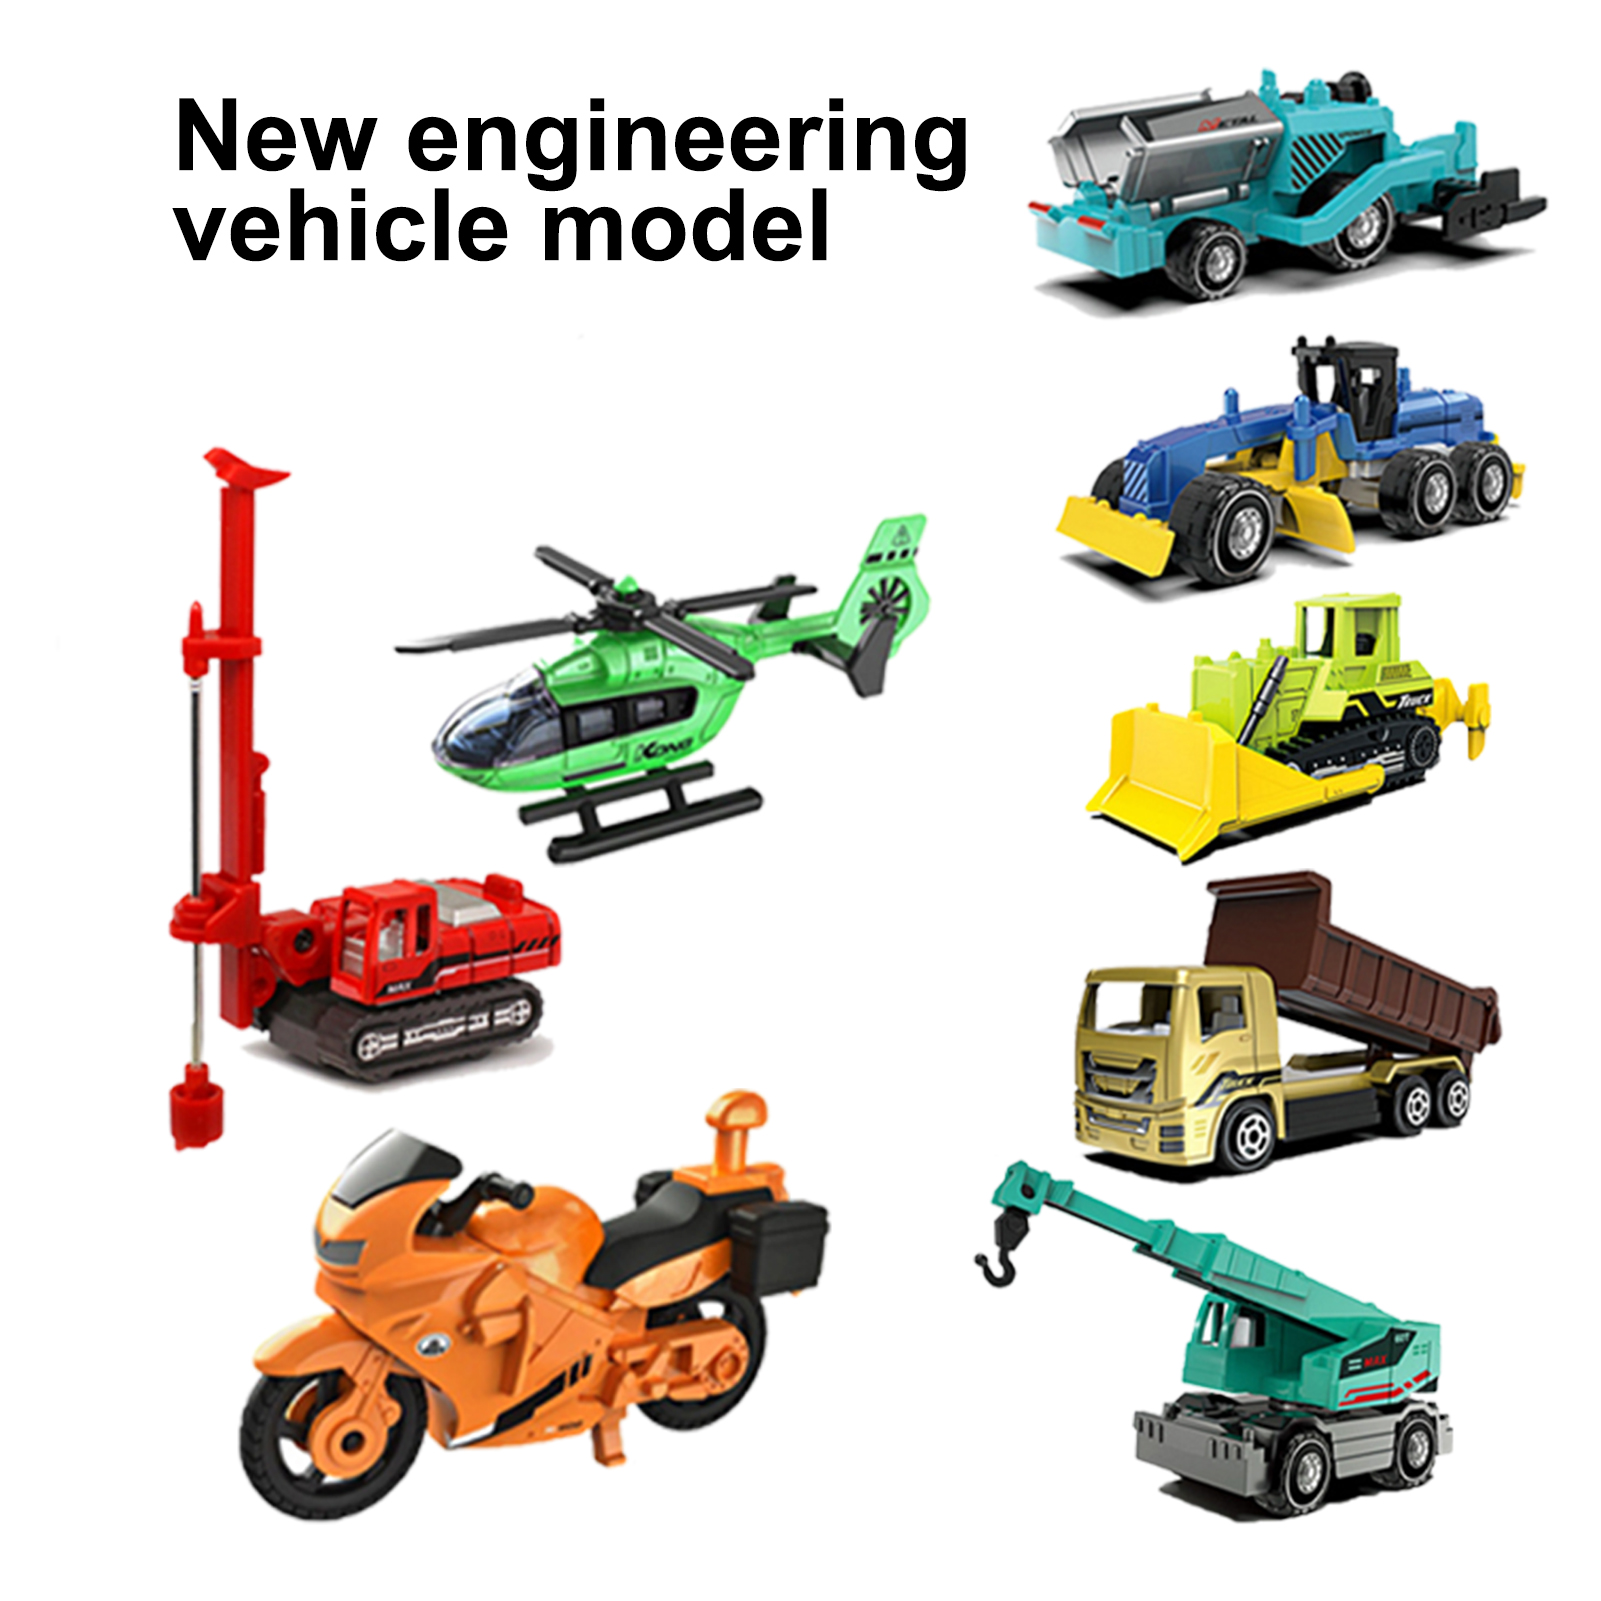 Pnellth 4Pcs/Set Engineering Trunk Toys Simulation Cranes Forklift Cargo Truck Diecast Alloy Vehicle Toy 1:64 Scale Engineering Vehicle Aircraft Motorcycle Models Set Christmas Gift - image 2 of 8